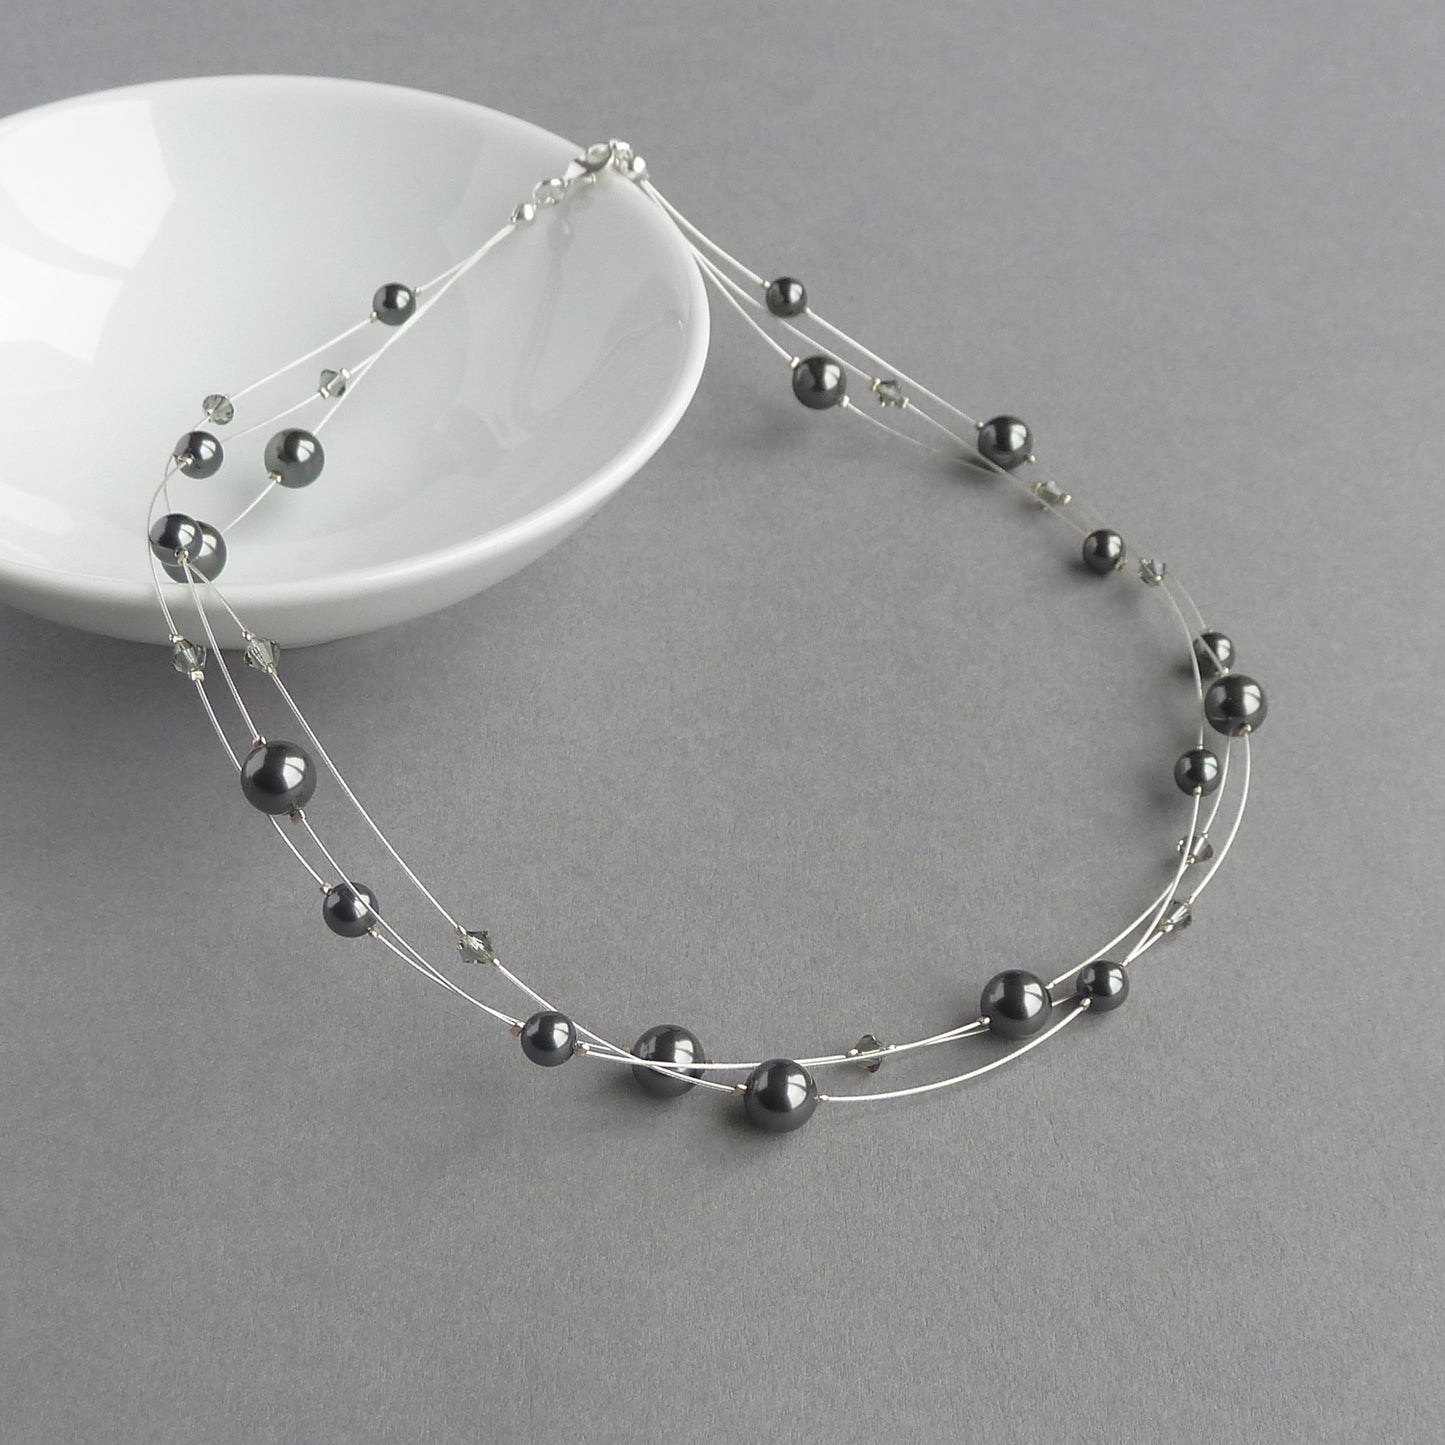 Charcoal grey floating pearl necklace